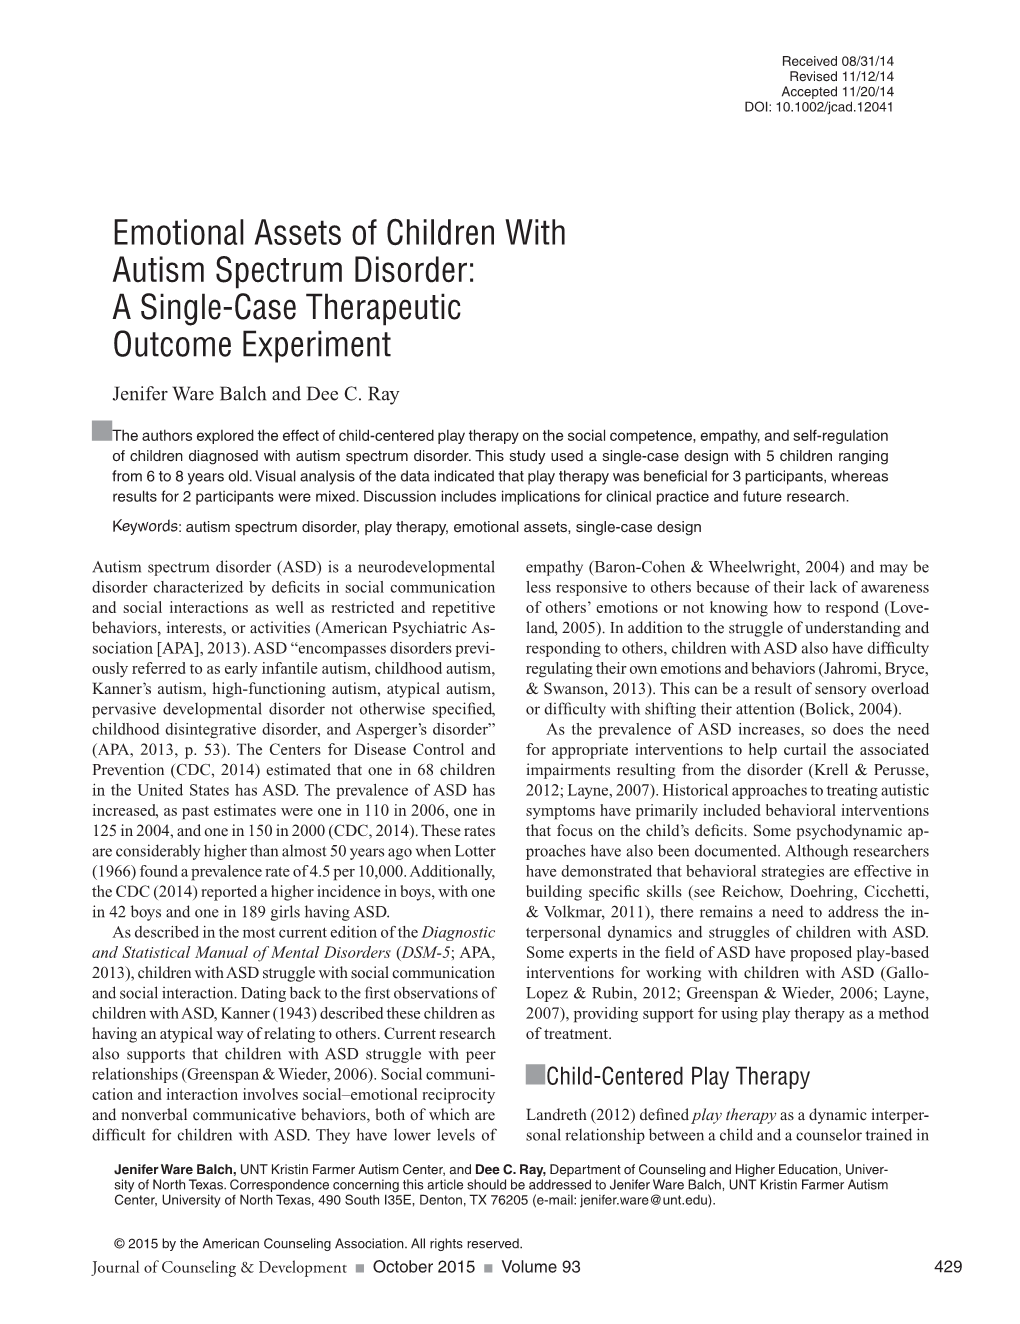 Emotional Assets of Children with Autism Spectrum Disorder: a Single-Case Therapeutic Outcome Experiment Jenifer Ware Balch and Dee C